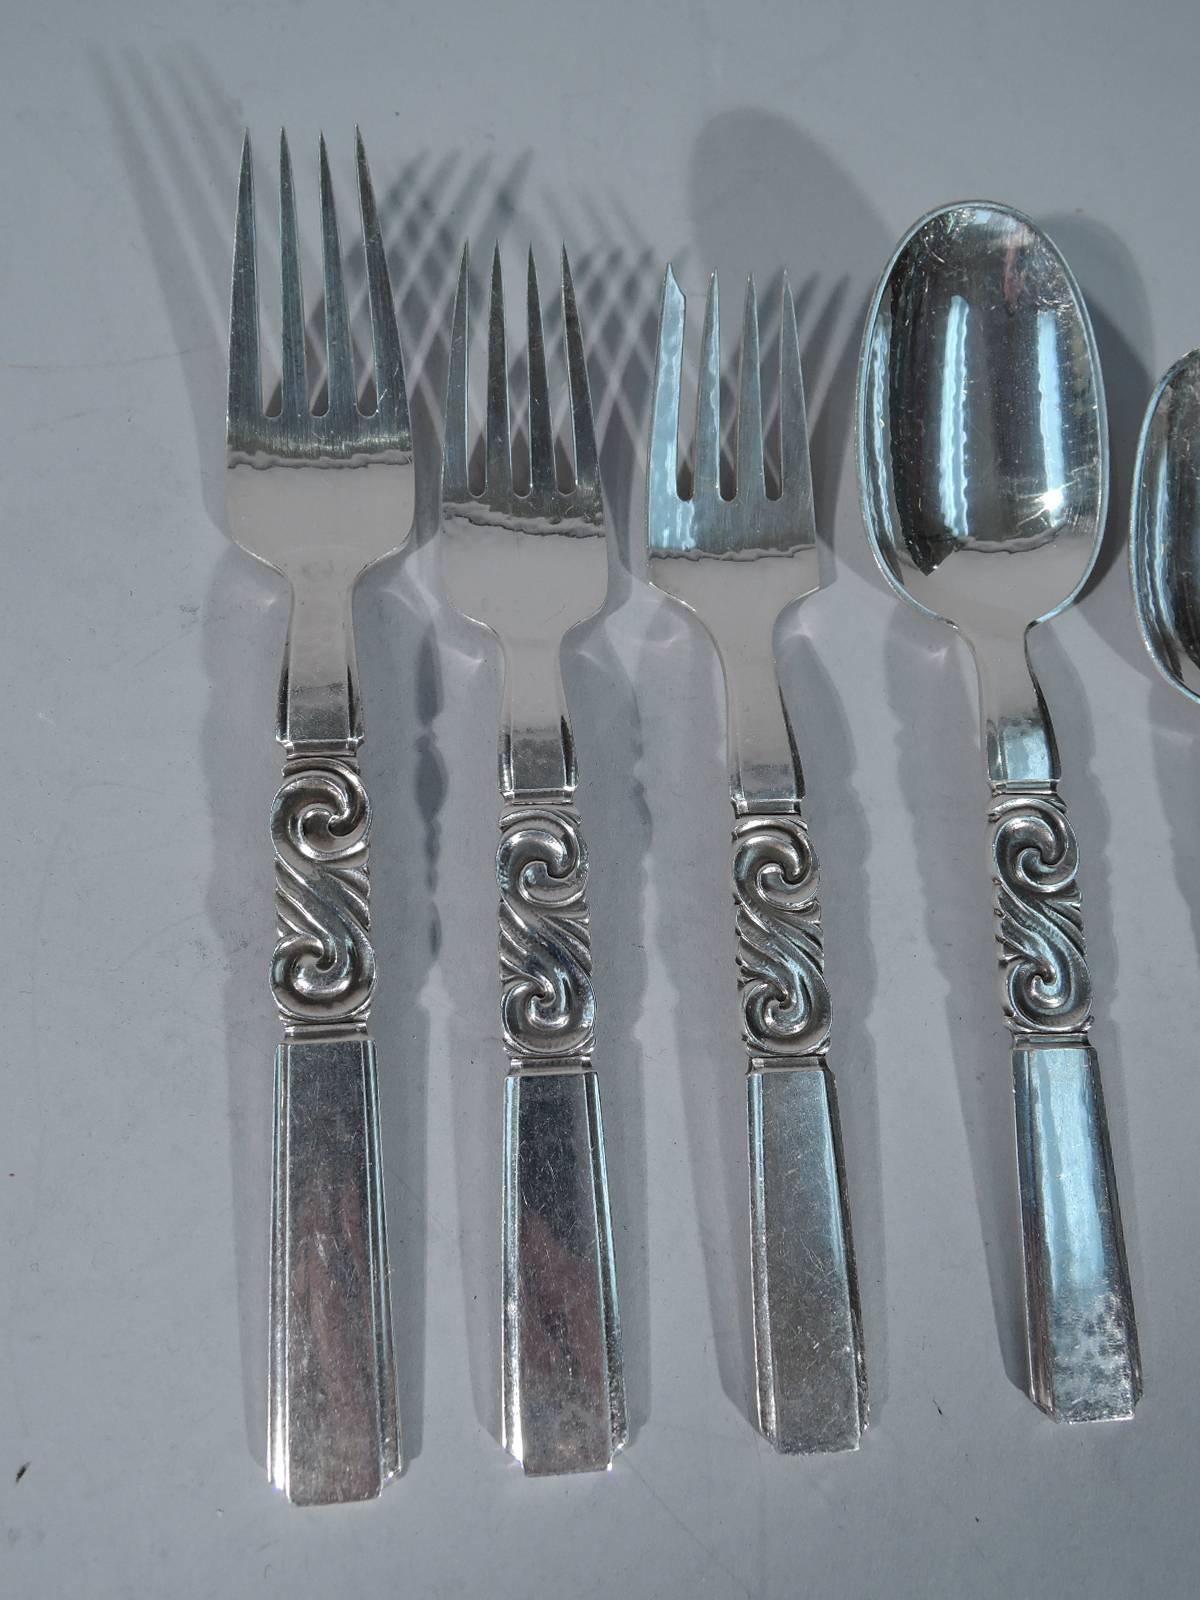 Sterling silver dinner service for 12 in scroll pattern. Made by Georg Jensen in Copenhagen. This service comprises 93 pieces (all dimensions in inches): Forks: 12 dinner forks (7), 12 dessert forks (6 3/8), 12 salad forks (6 1/4), Spoons: 12 oval